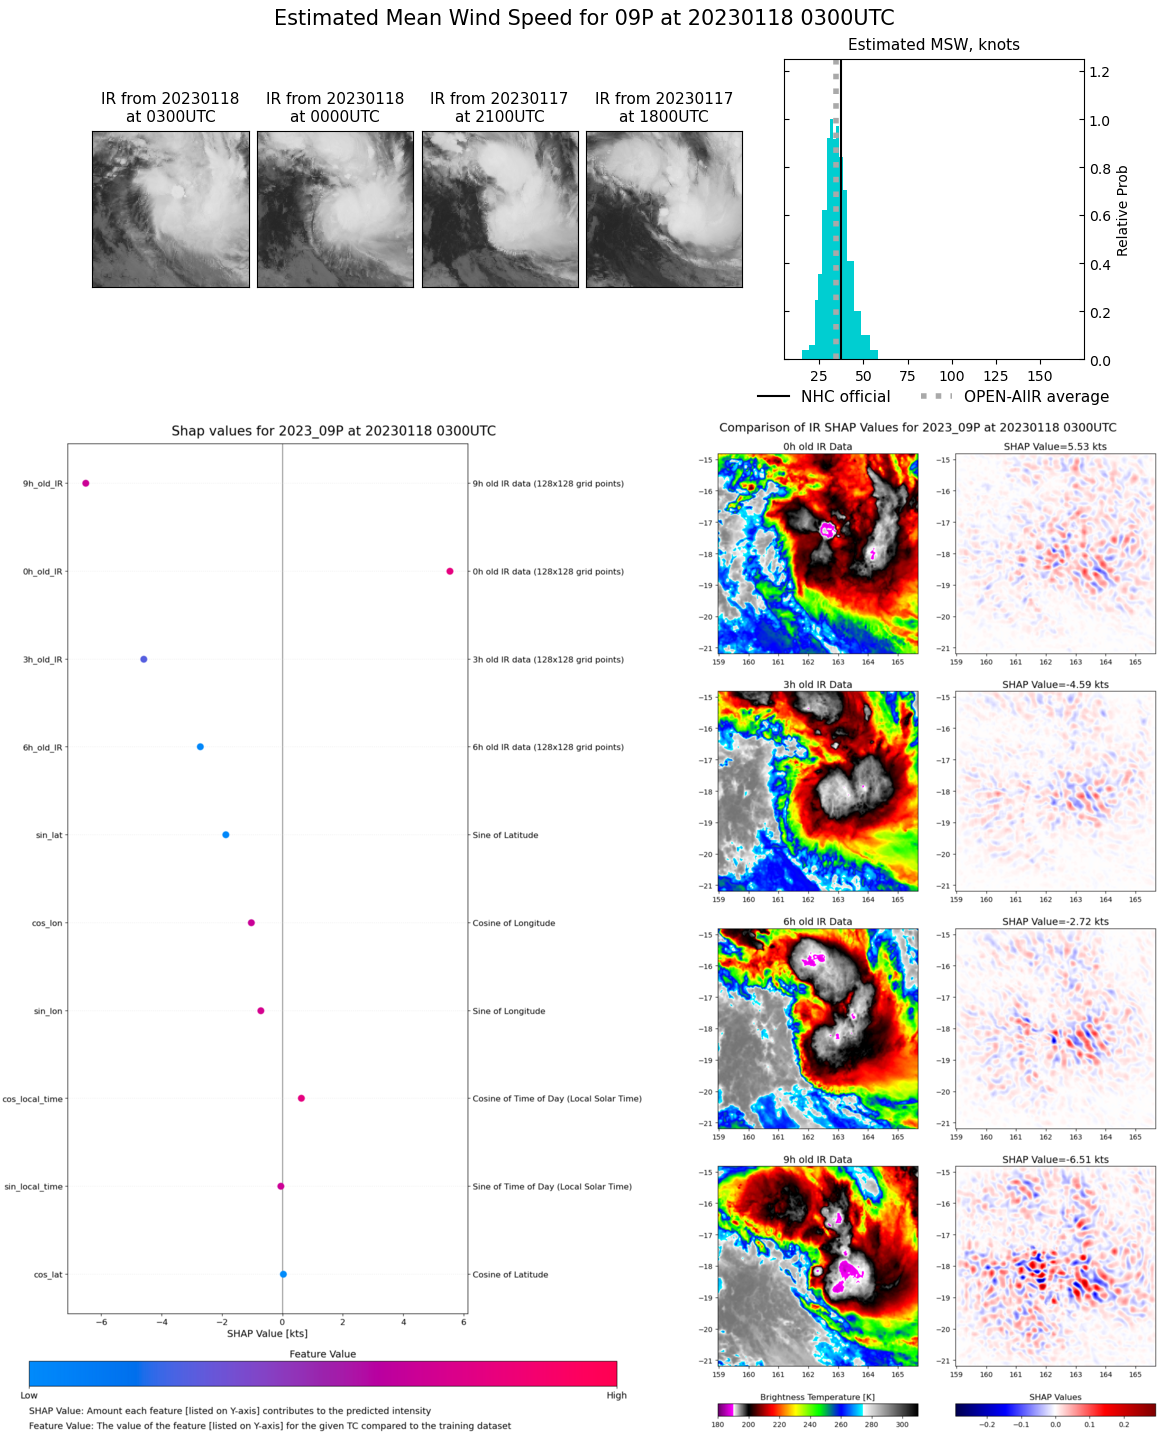 SATELLITE ANALYSIS, INITIAL POSITION AND INTENSITY DISCUSSION: ANIMATED MULTISPECTRAL SATELLITE IMAGERY (MSI) DEPICTS A PARTIALLY EXPOSED LOW LEVEL CIRCULATION CENTER (LLCC) WITH TWO PRIMARY SPIRAL BANDS OF DEEP CONVECTION. A 172200Z ASCAT-B SCATTEROMETERY PARTIAL PASS SHOWS THE EASTERN SEMICIRCLE OF TC 09P WHICH INDICATES A RELATIVELY COMPACT CIRCULATION WITH A FIELD OF 35KT WINDS TO THE NORTHEAST OF THE LLCC.  THE INITIAL POSITION IS PLACED WITH MEDIUM CONFIDENCE BASED ON MSI AND PARTIAL ASCAT-B IMAGERY. THE INITIAL INTENSITY OF 35 KTS IS ASSESSED WITH HIGH CONFIDENCE BASED ON AGENCY DVORAK CURRENT INTENSITY ESTIMATES WHICH INDICATE 30-35KTS HOWEVER BOTH PGTW AND KNES SHOW A FINAL T OF T2.0 DUE TO CONSTRAINTS, WHILE THEIR DATA T NUMBERS ARE T2.5, SO THE TRUE CONSENSUS IS NEAR 35KTS.